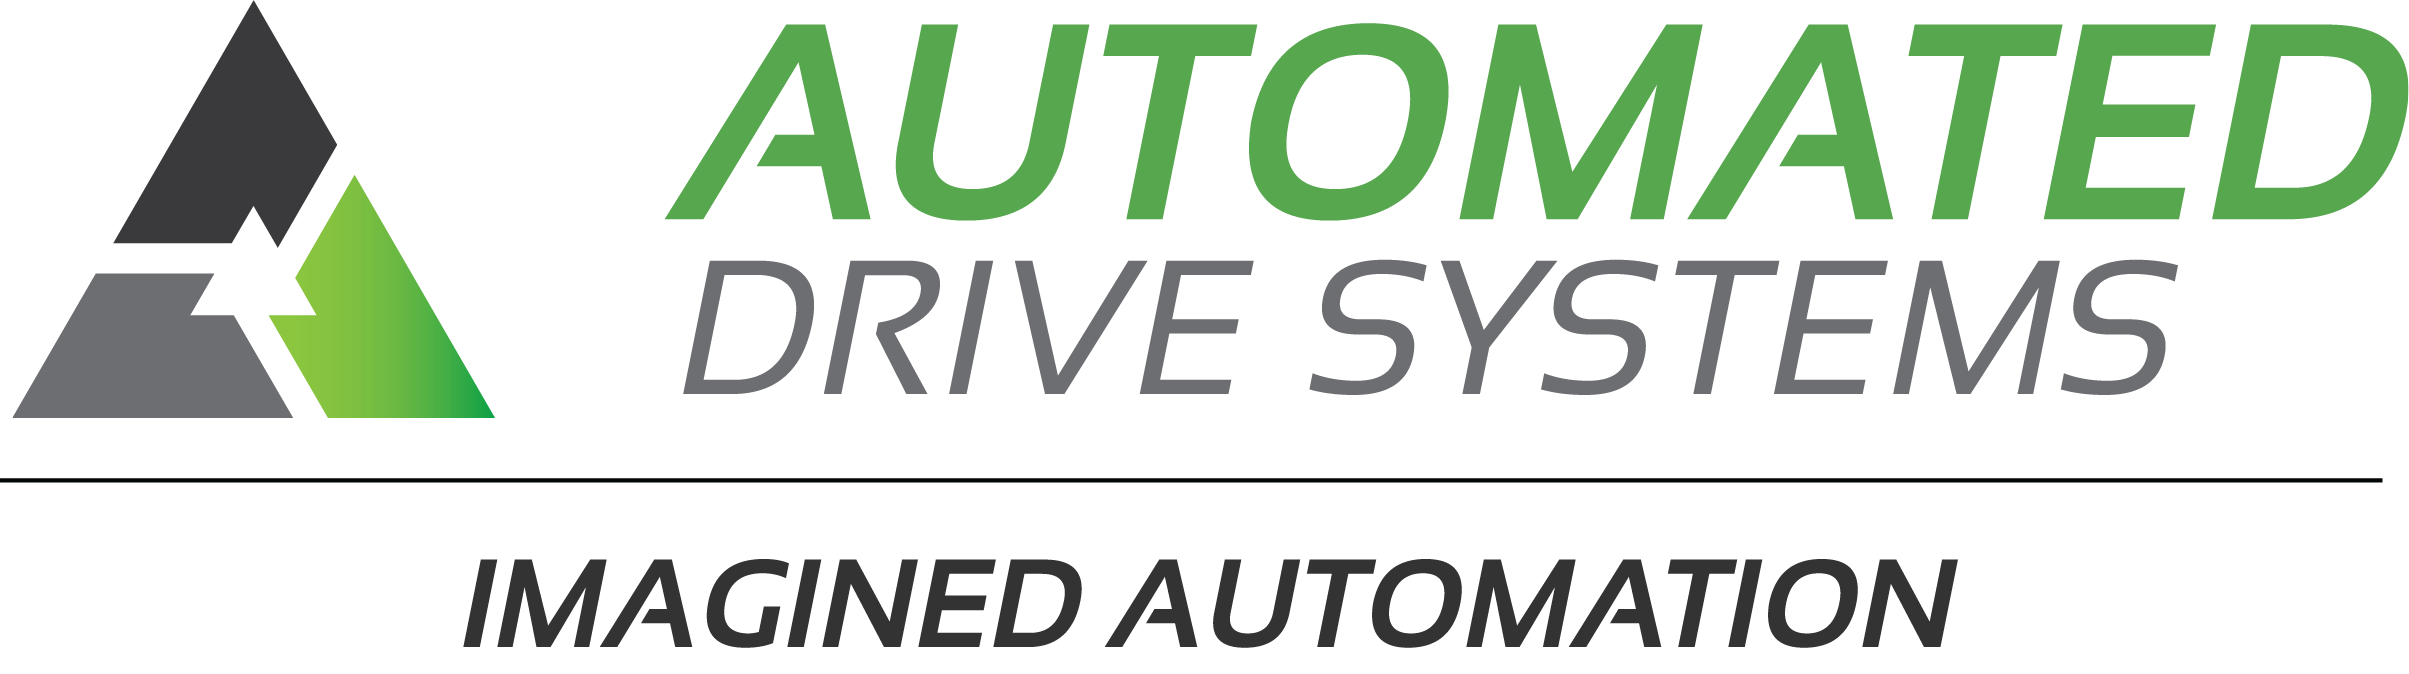 Automated Drive Systems